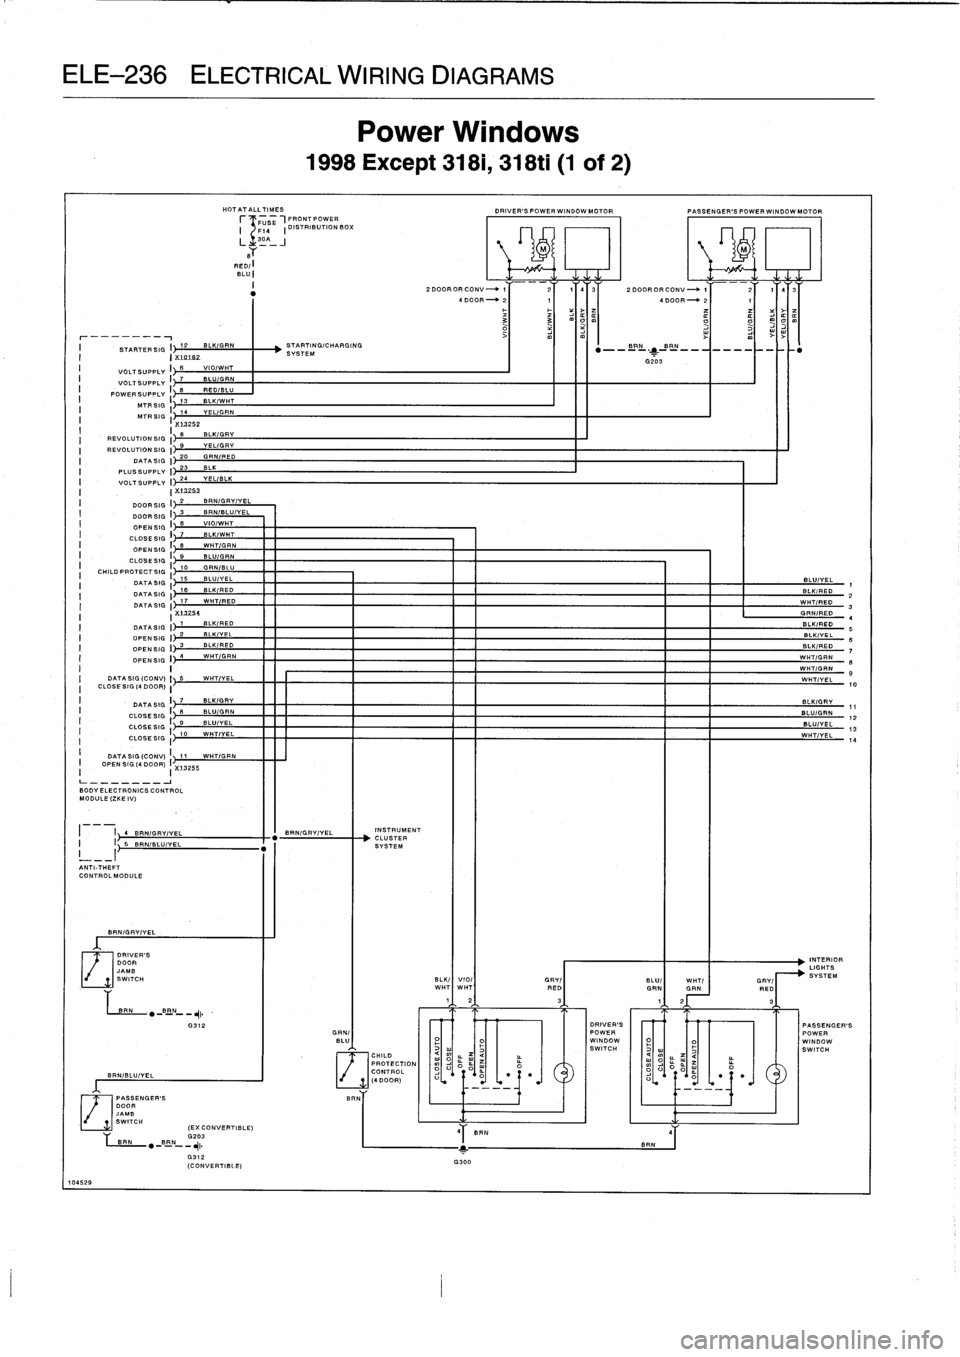 BMW 325i 1997 E36 Owners Manual 
ELE-236
ELECTRICAL
WIRING
DIAGRAMS

HOTATALLTIMES
f
-
-T
USE
-1FRONTPOWER
F14

	

I
DISTRIBUTION
BOX

RED/
:
BLU
:

I

	

STARTERSIG
I
12

	

BLKIGRN

	

STARTING/CHARGING
I

	

I
X
10182

	

SYSTEM
